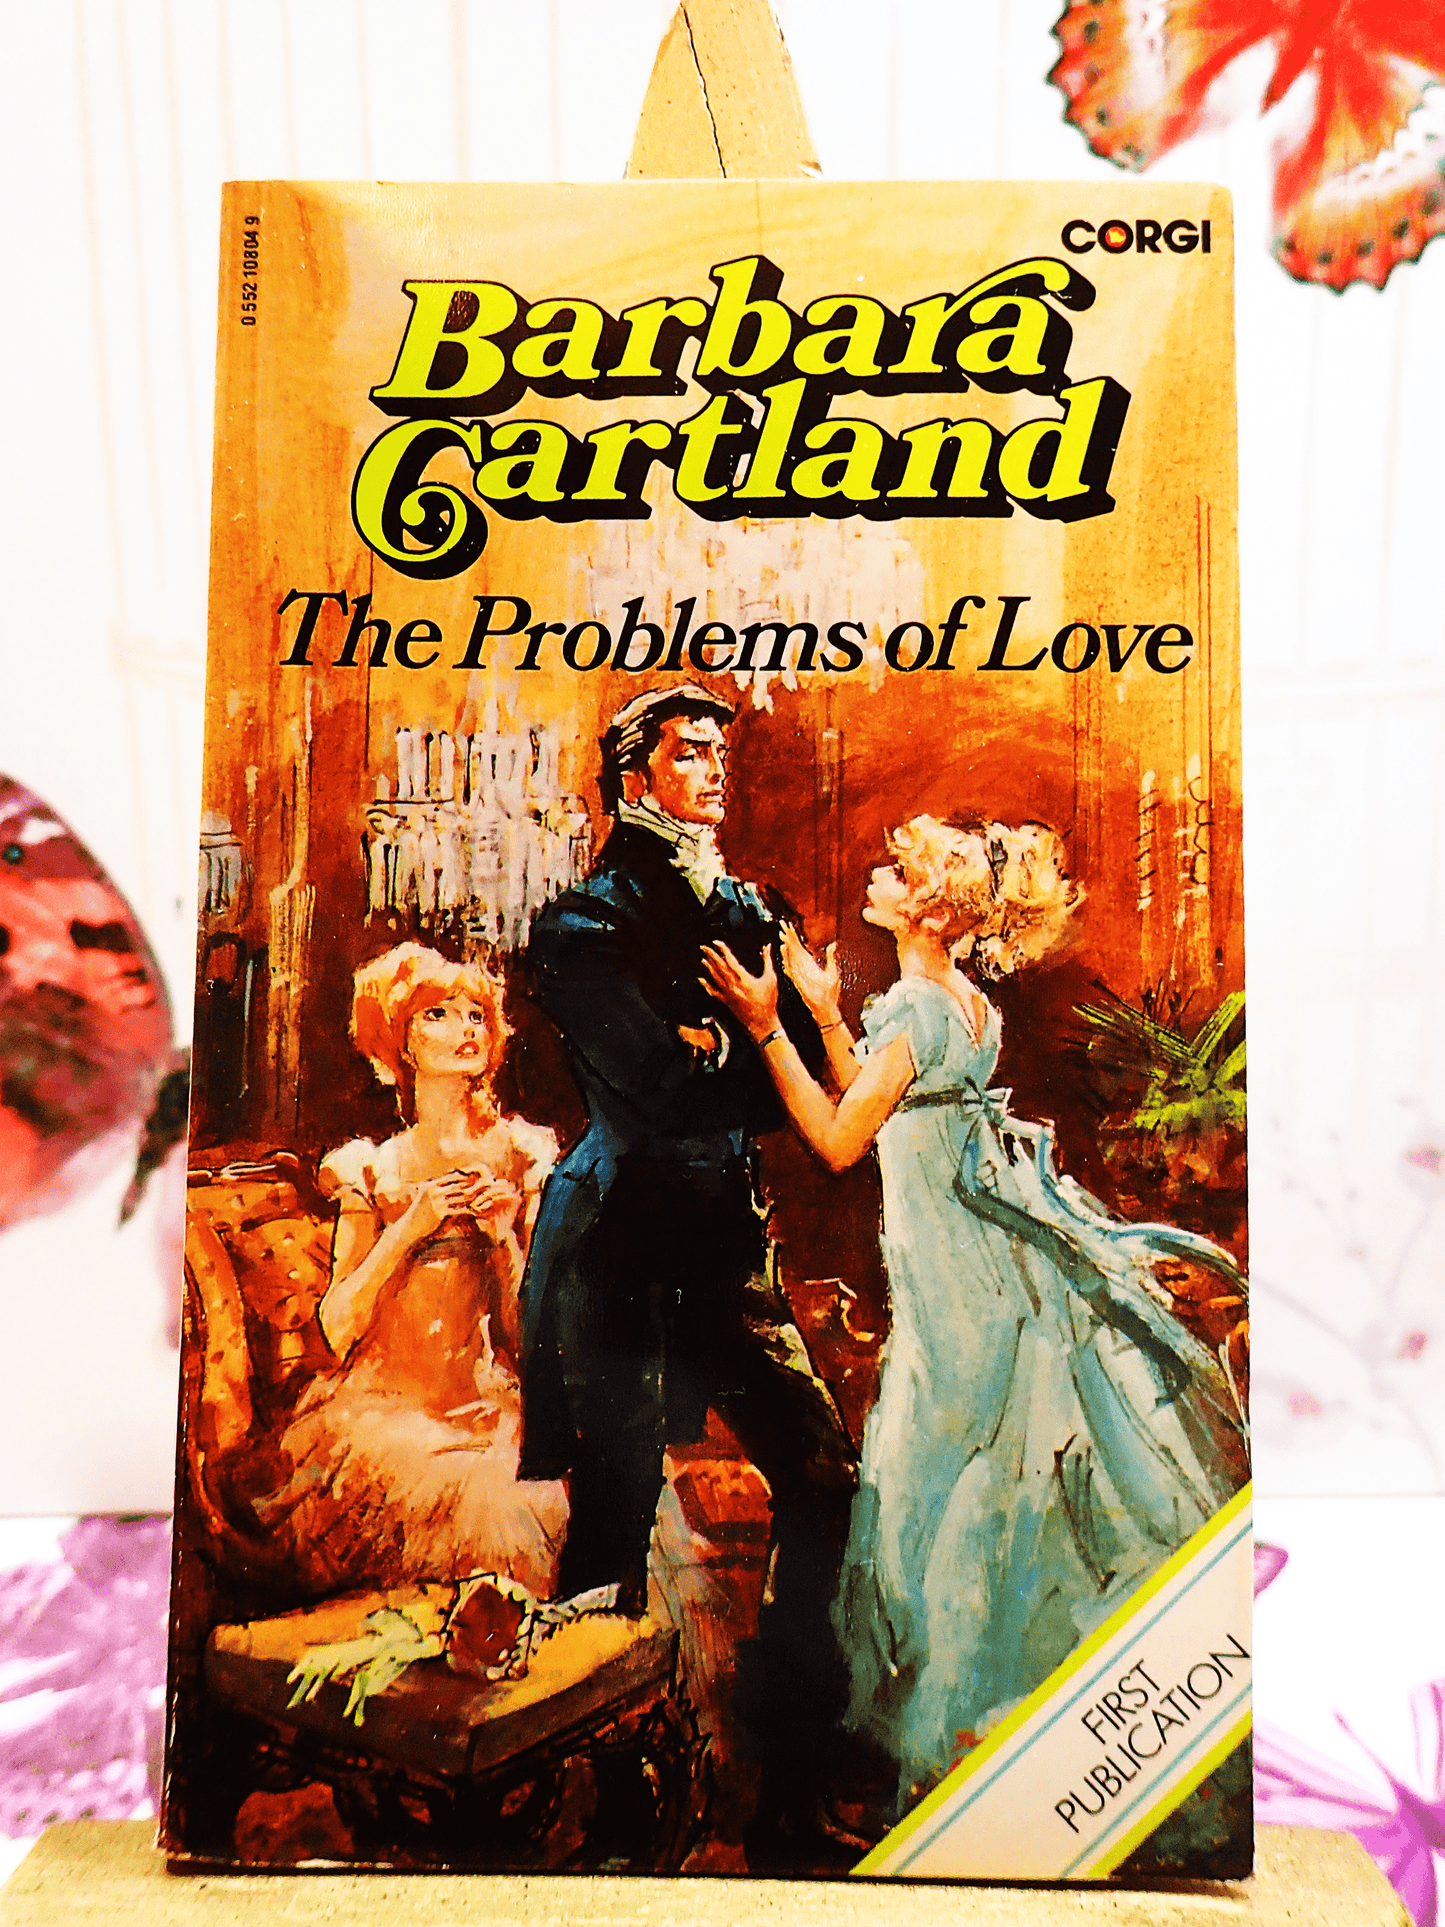 Front cover of The Problems of Love Barbara Cartland Corgi first edition showing a pretty woman in a blue dress pleading with a handsome man. 